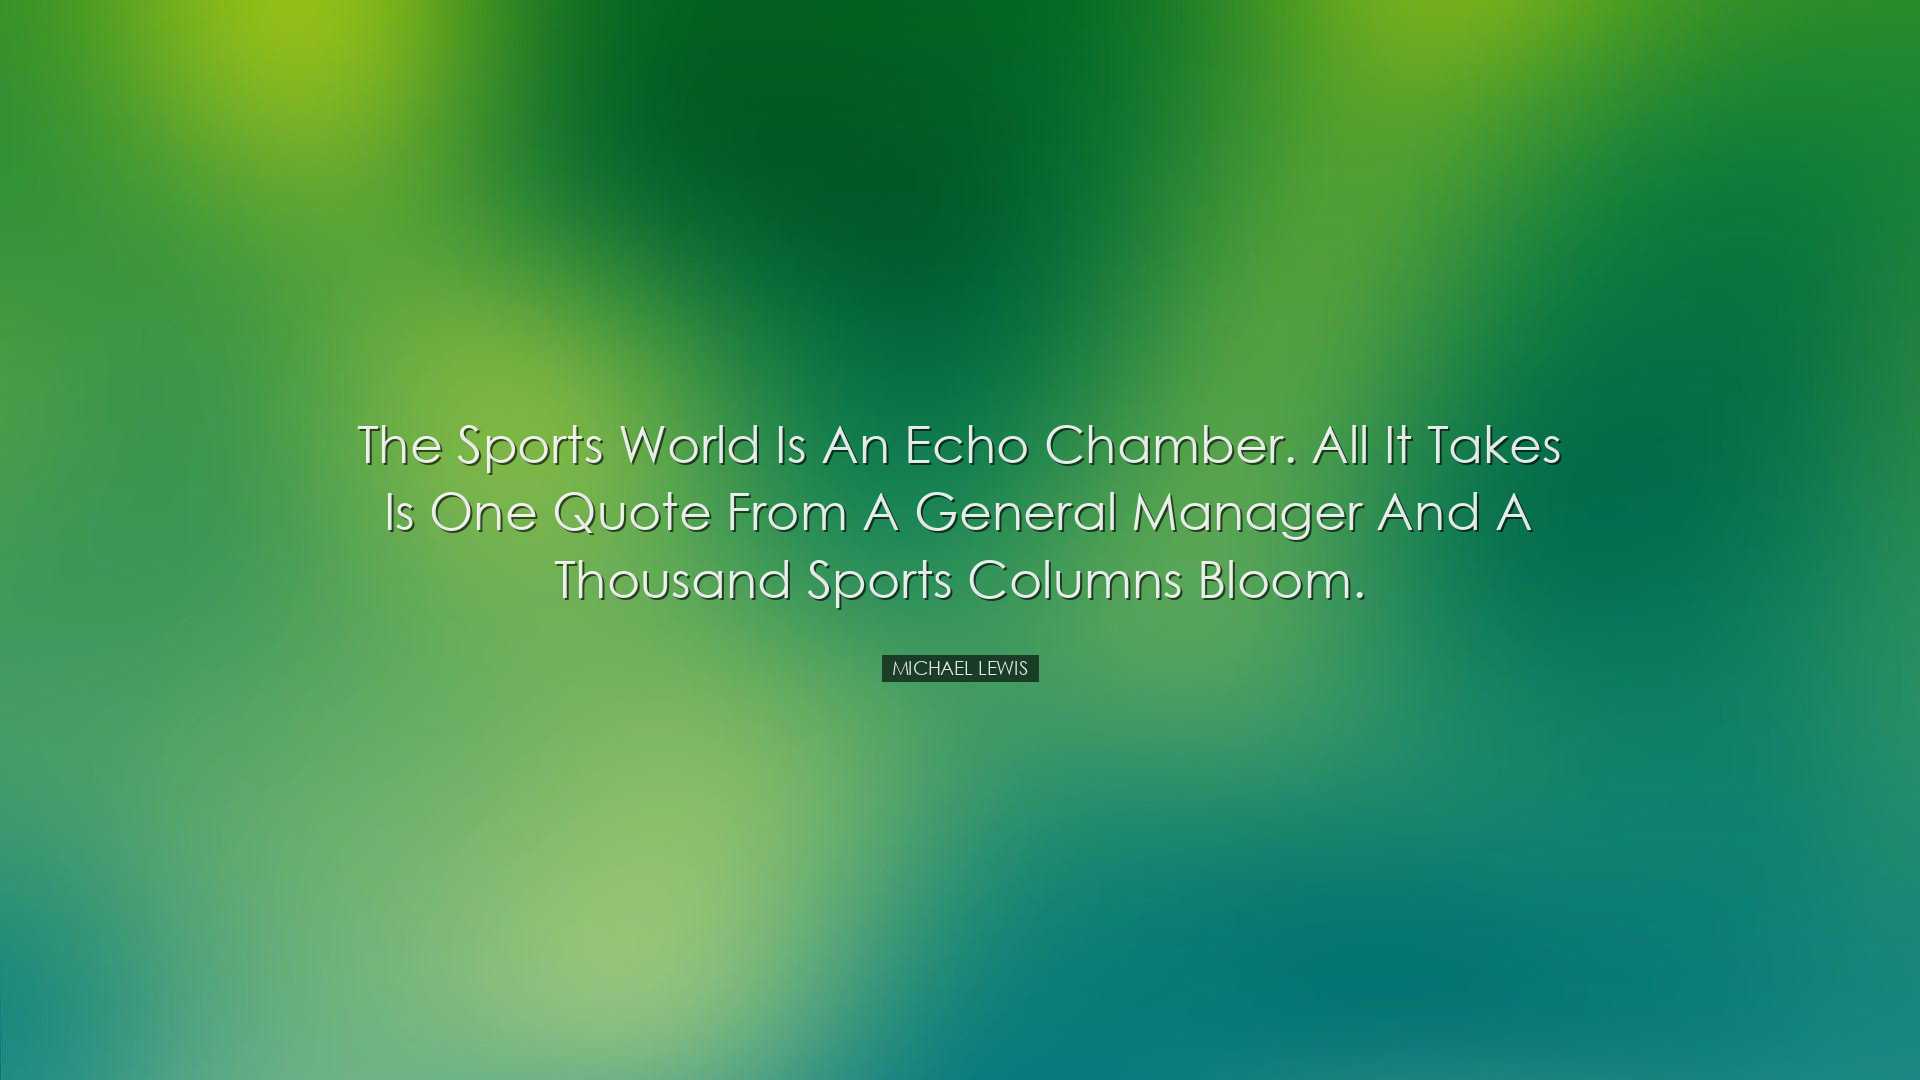 The sports world is an echo chamber. All it takes is one quote fro